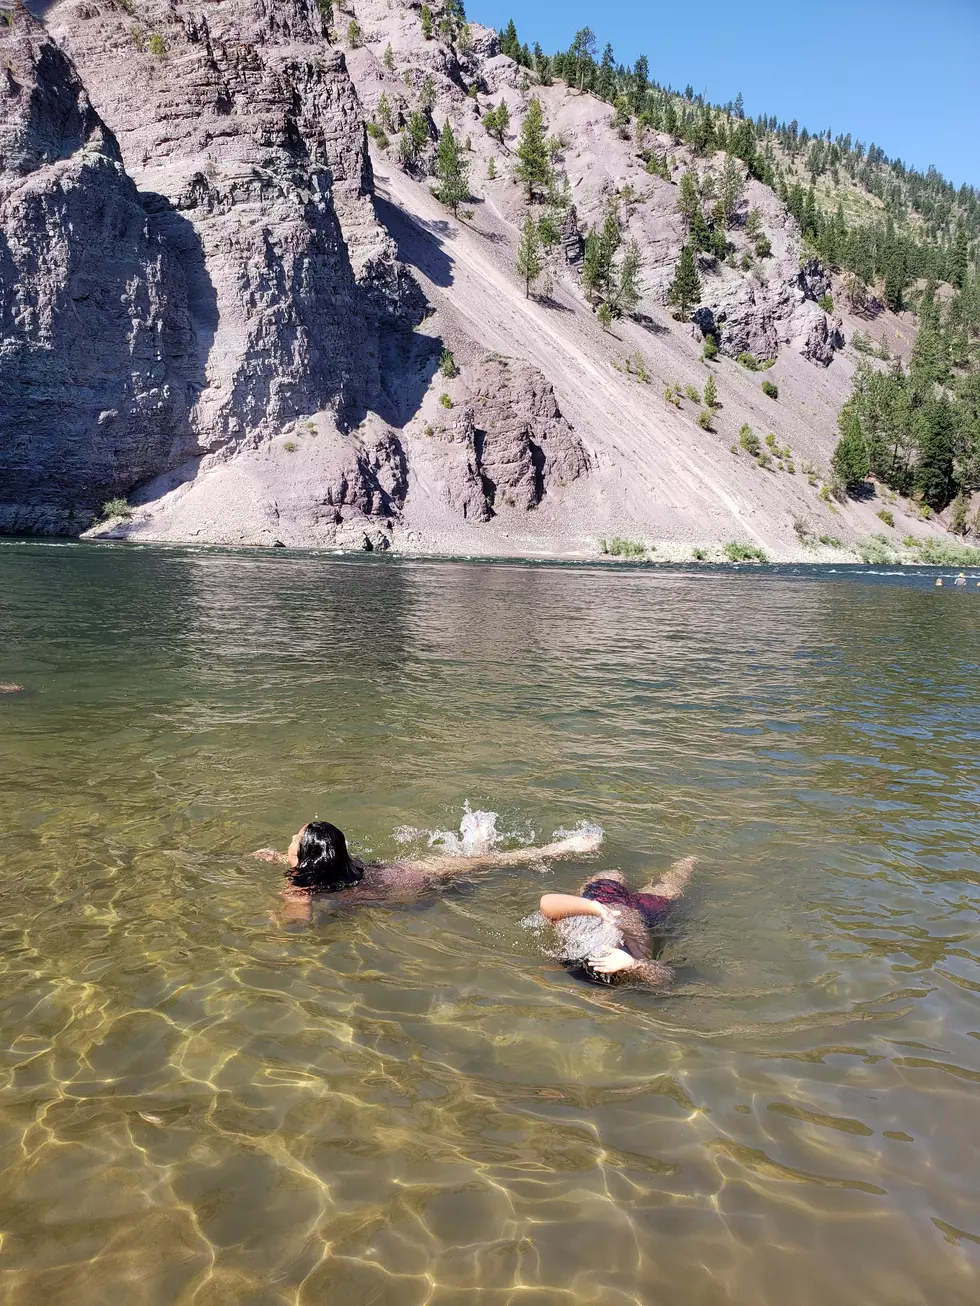 A Missoulian Made a Handy Map Showing the Best Places to Go River Swimming